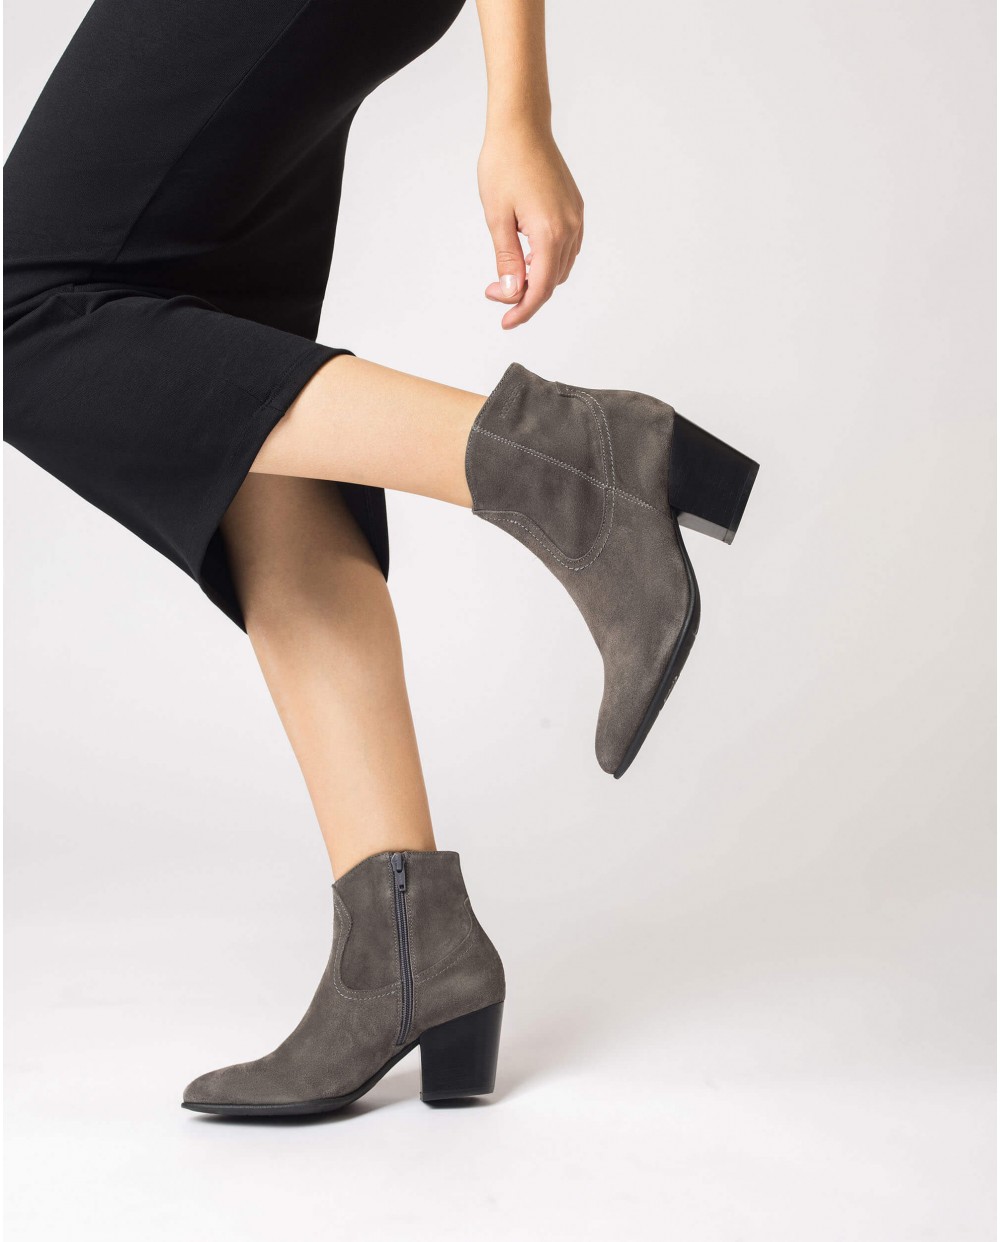 Wonders-Ankle Boots-Grey CANE ankle boot